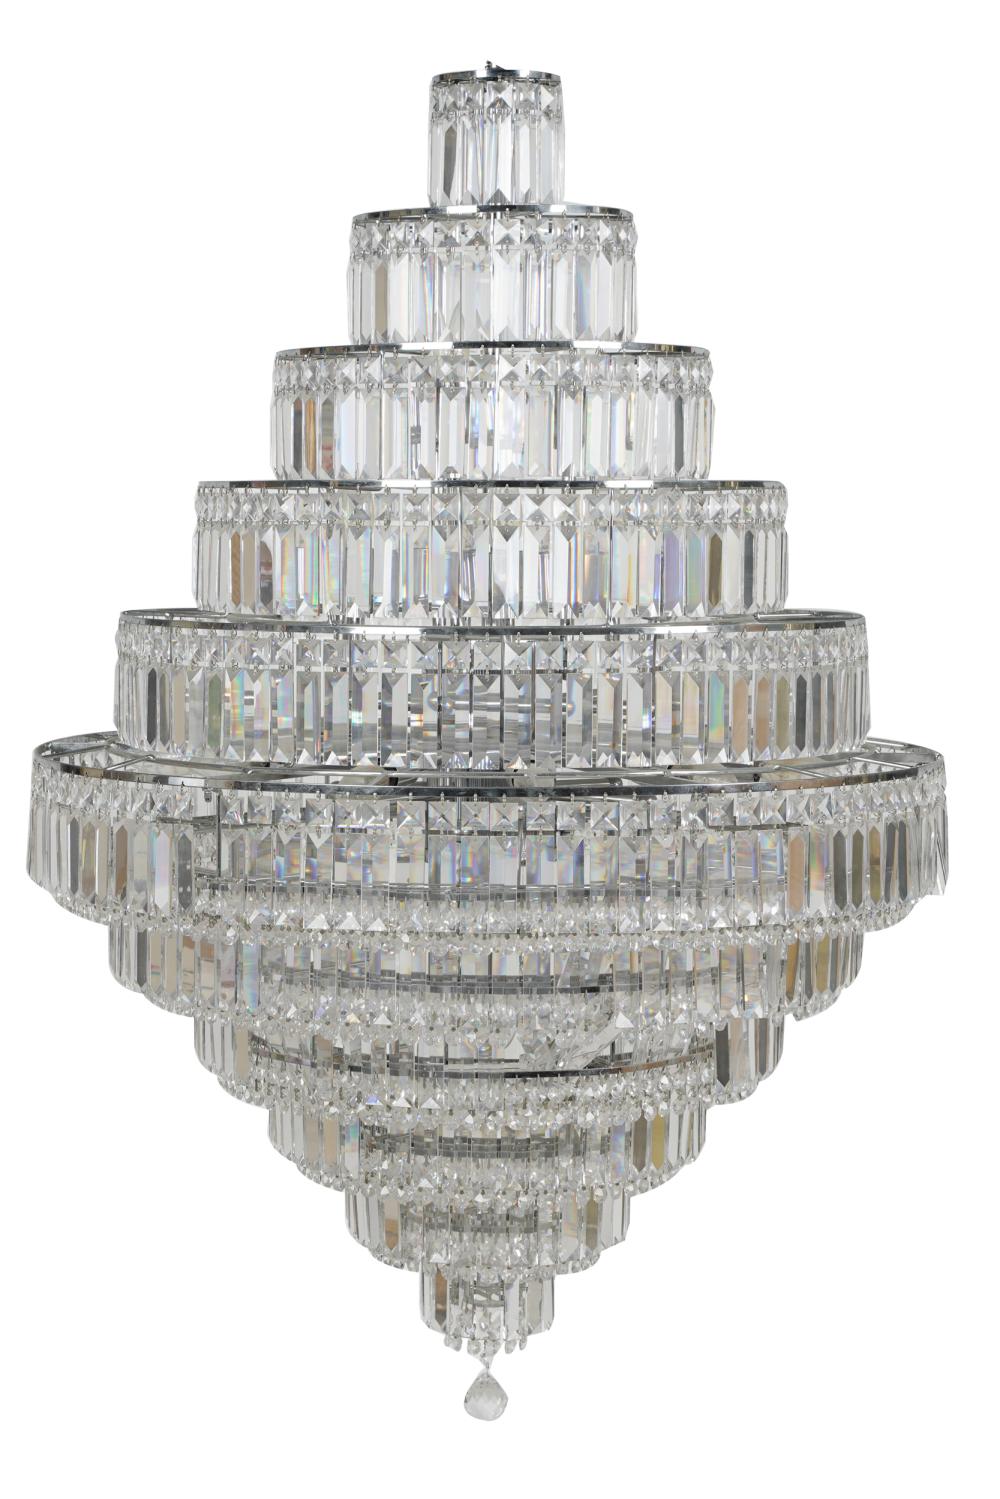 DROP CRYSTAL CHANDELIERwith eleven 333391